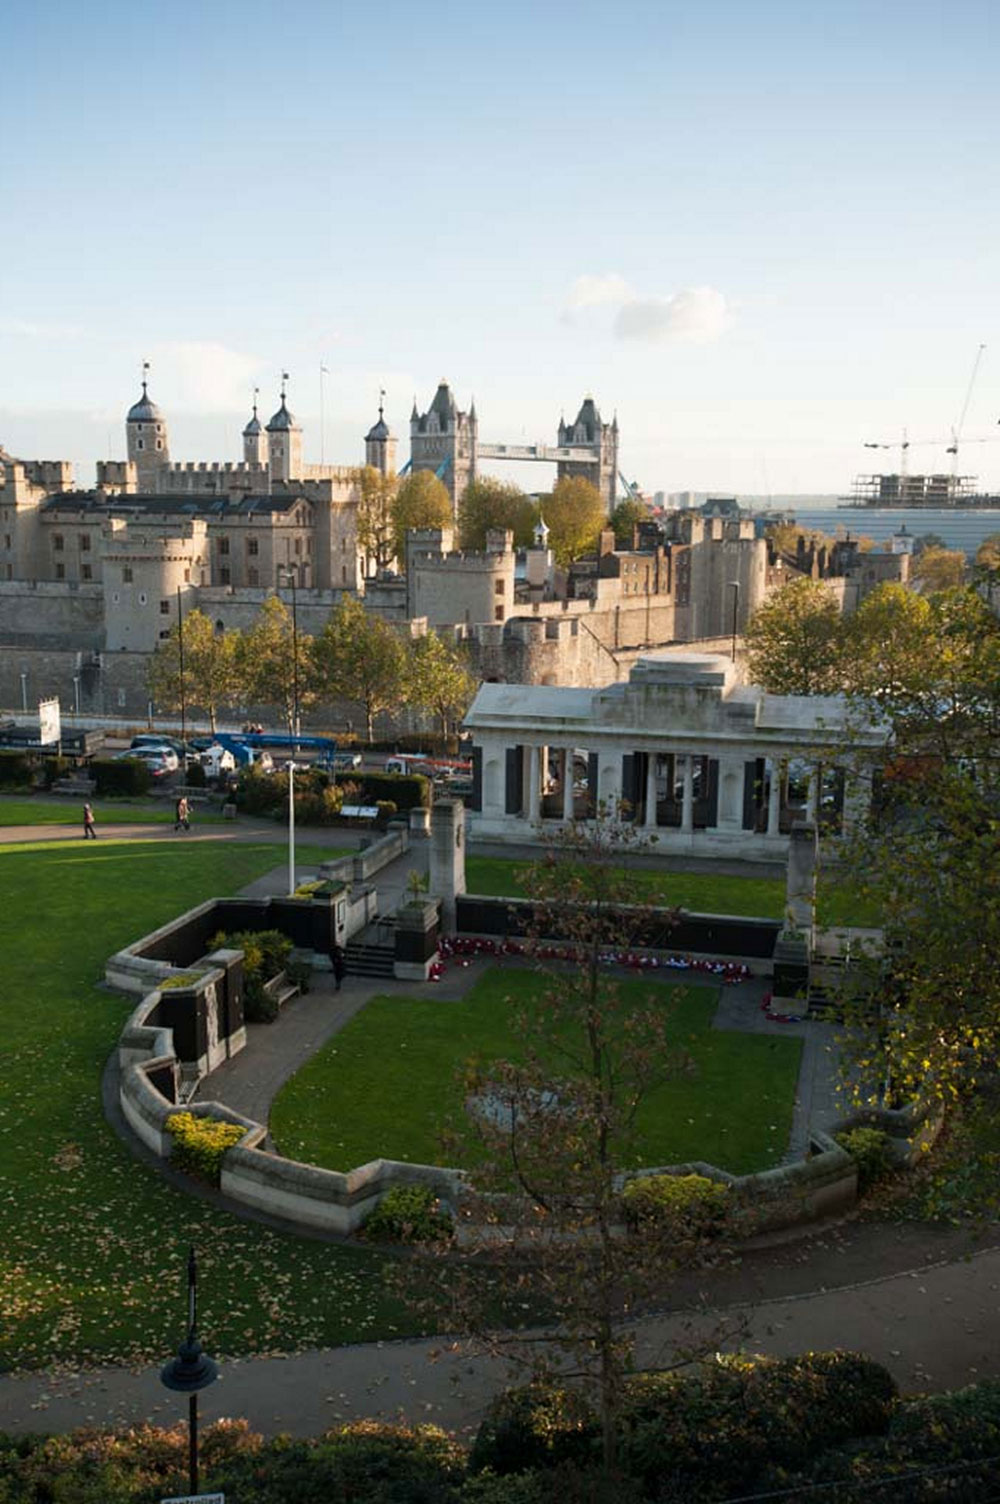 View of the Tower Hill Memorial with the Tower of London in the background.